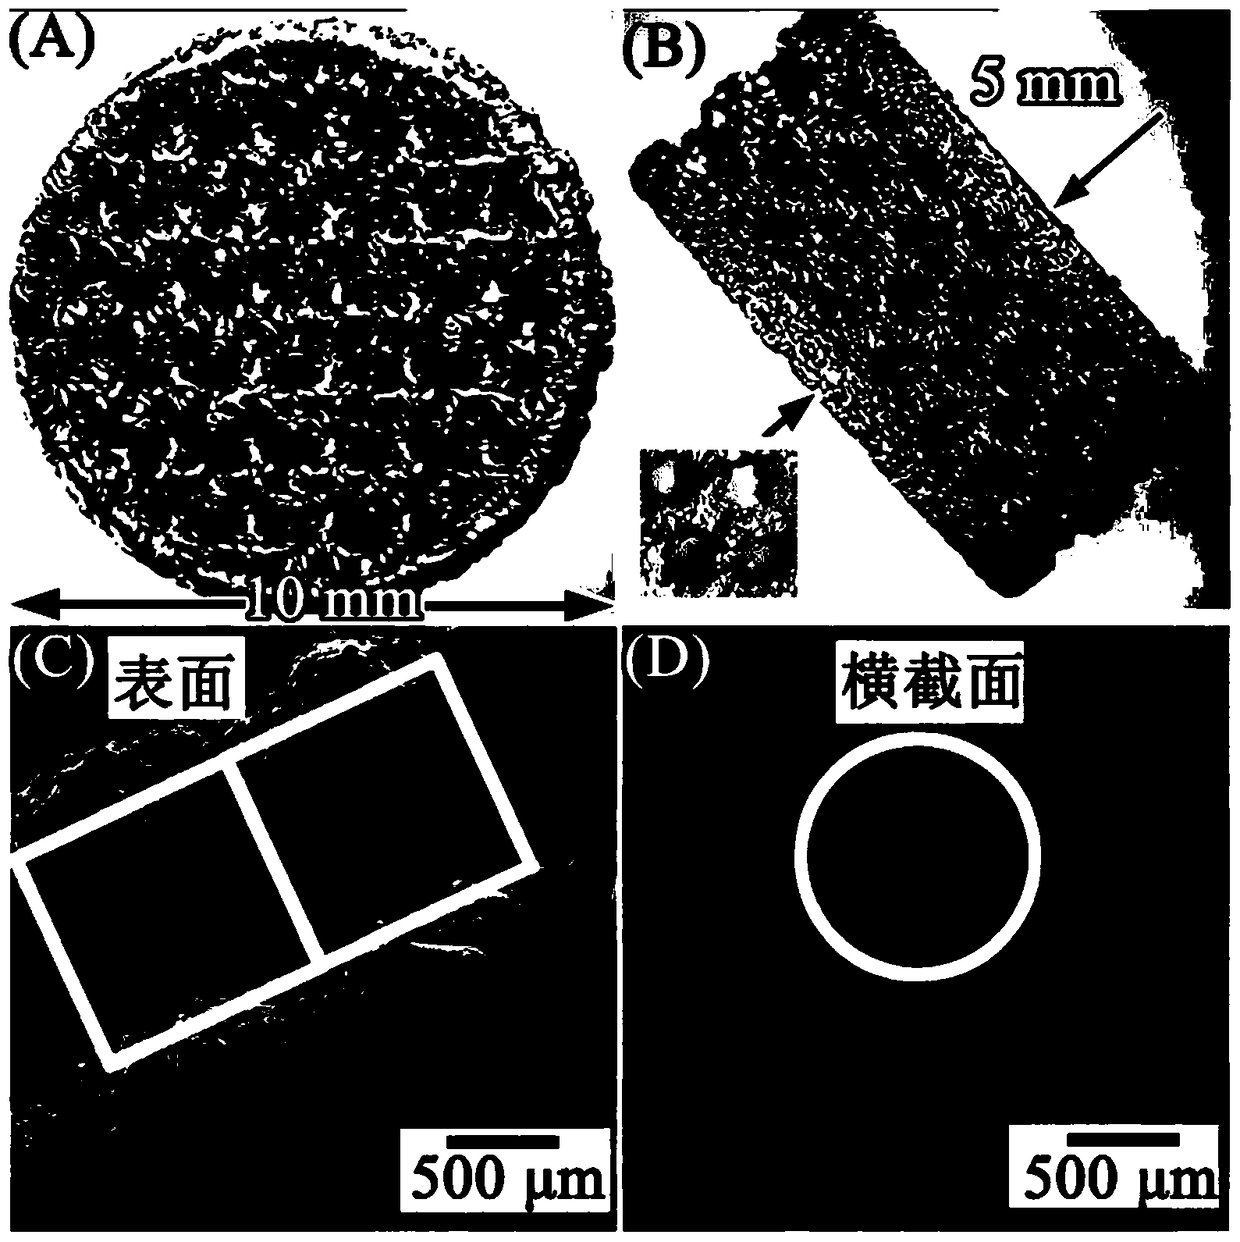 A method for surface modification of orthopedic implant medical devices